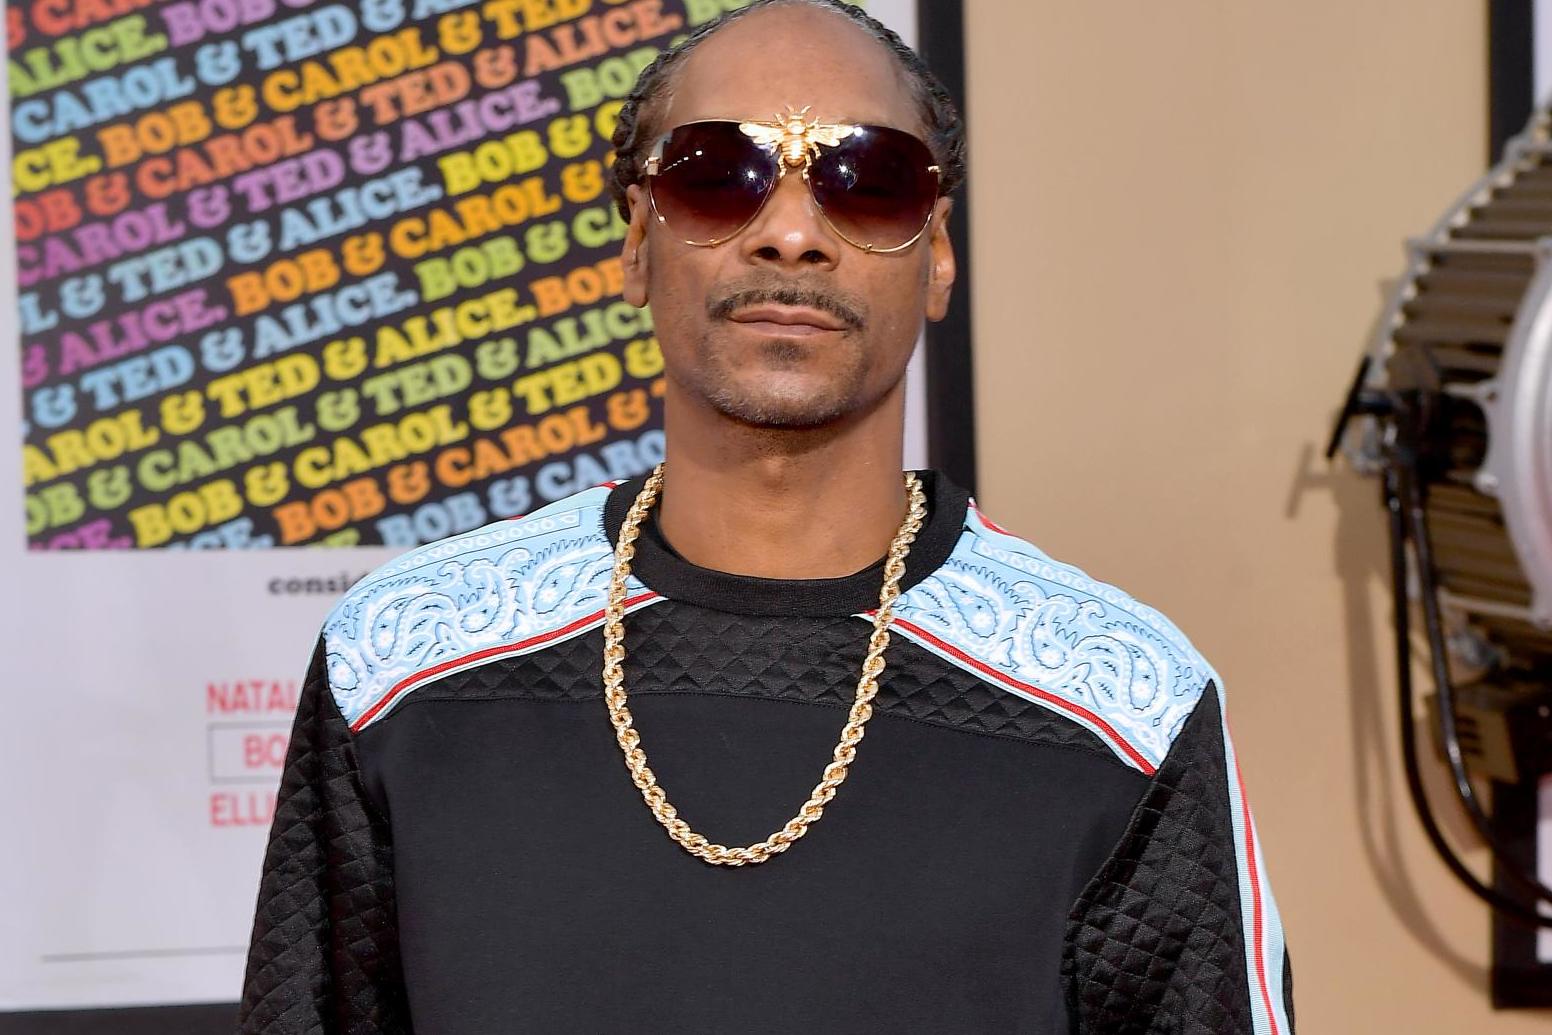 Snoop Dogg attends the 'Once Upon a Time... in Hollywood' premiere on 22 July, 2019 in Hollywood, California.